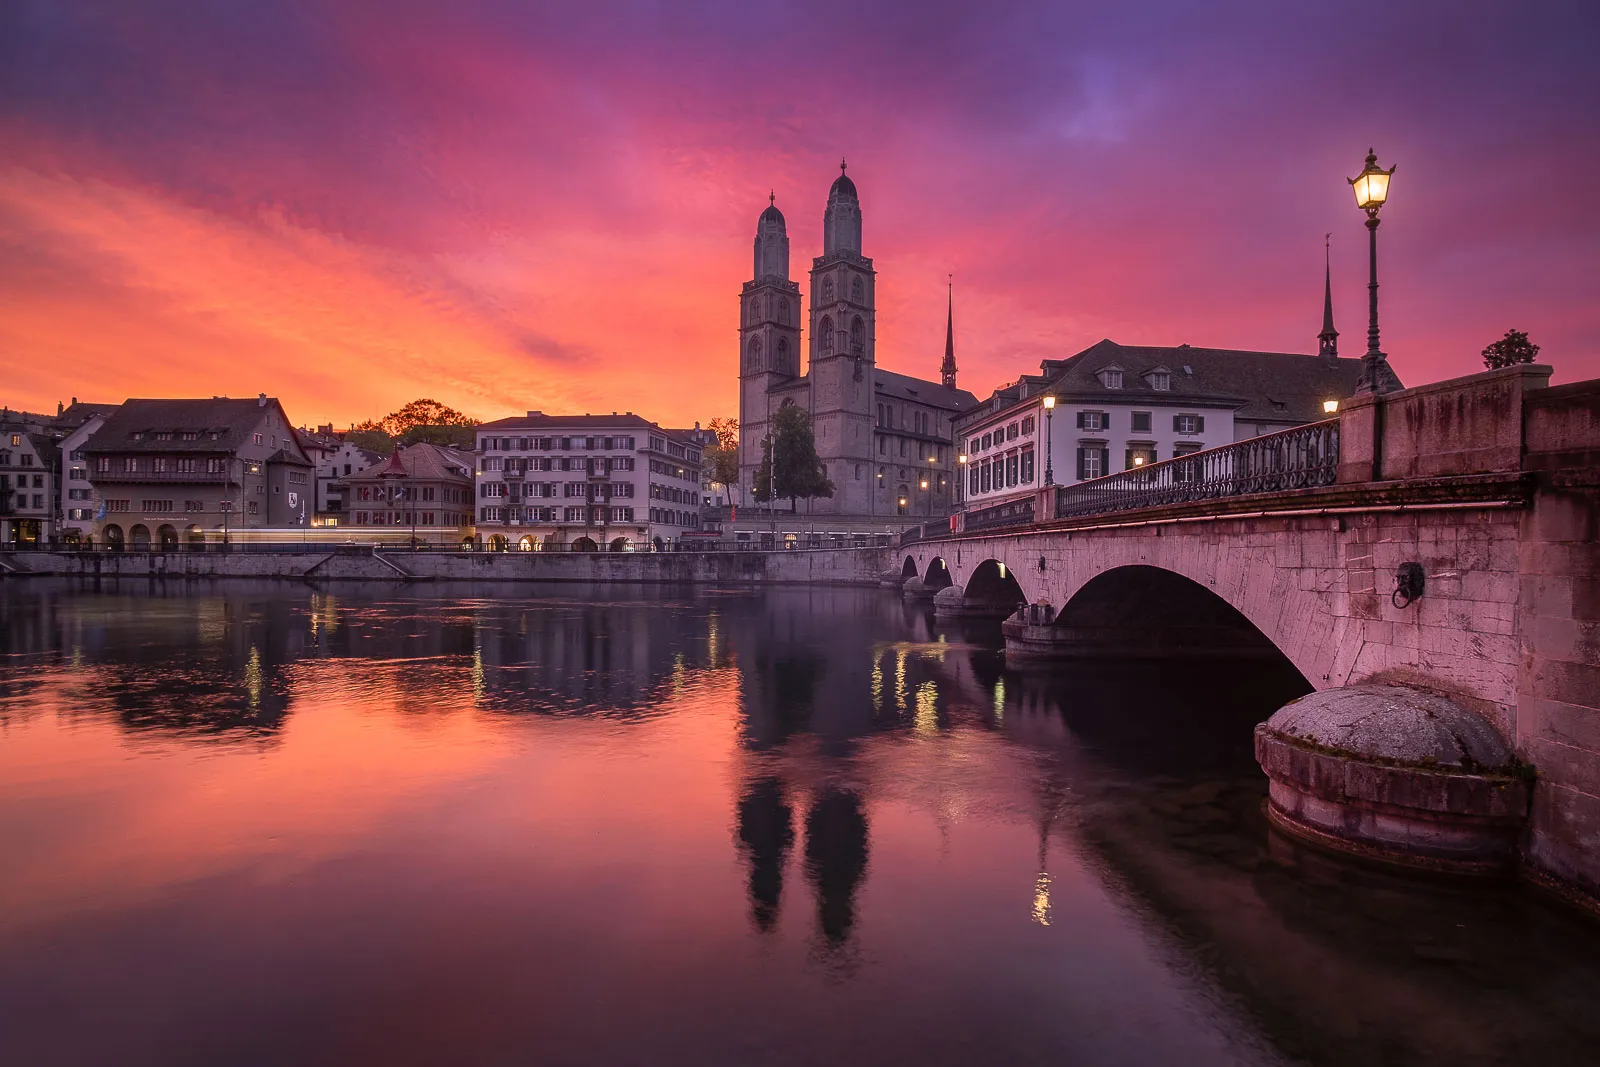 View of Grossmünster church and Münsterbrücke, the bridge connecting both sides of the Old Town in Zurich. Taken on a special morning when the high clouds caught the first light of the rising sun.